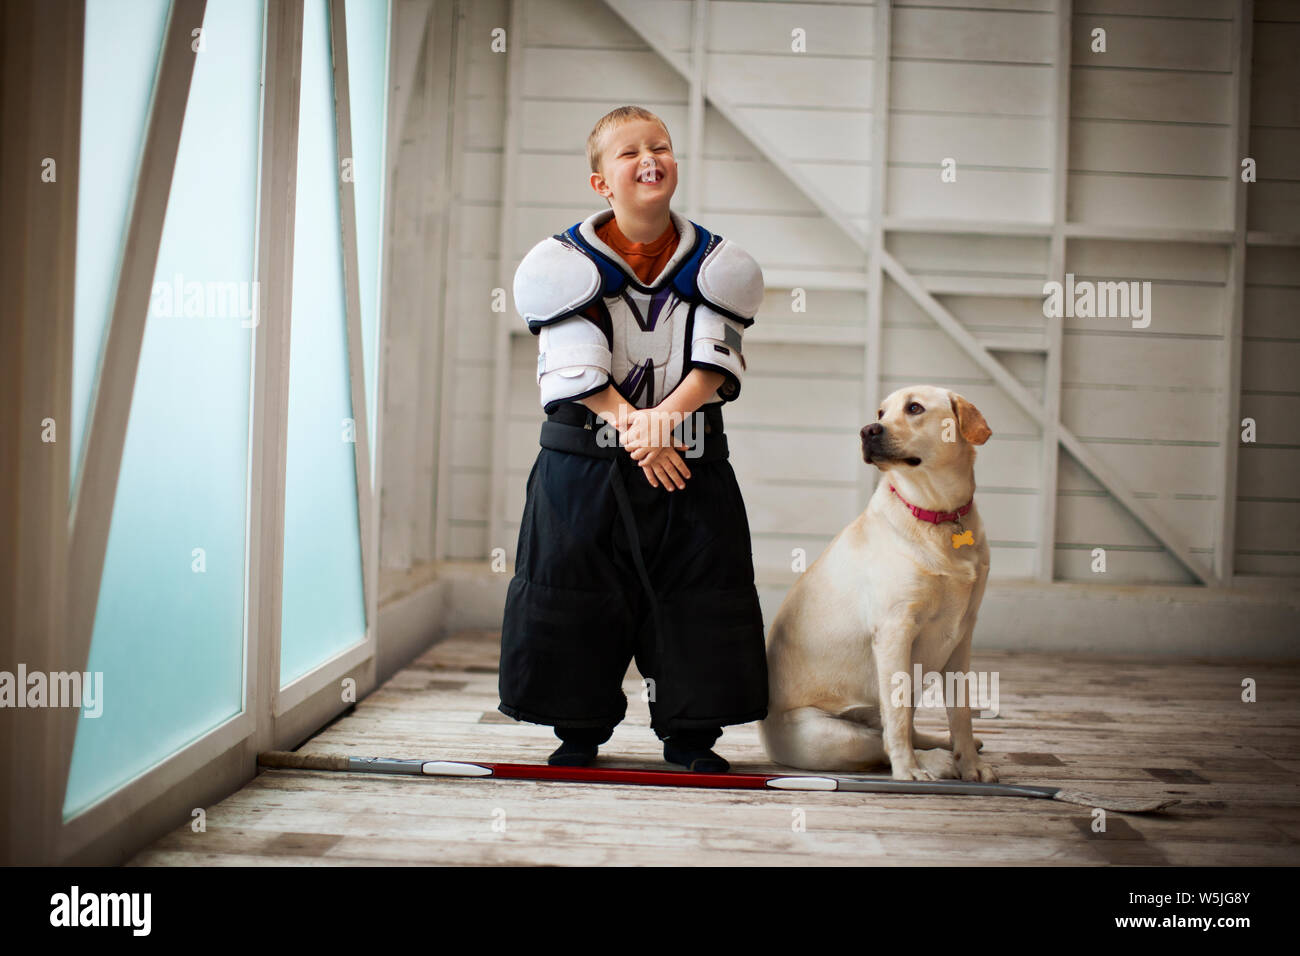 Portrait of young boy dressed up in an oversized hockey uniform. Stock Photo